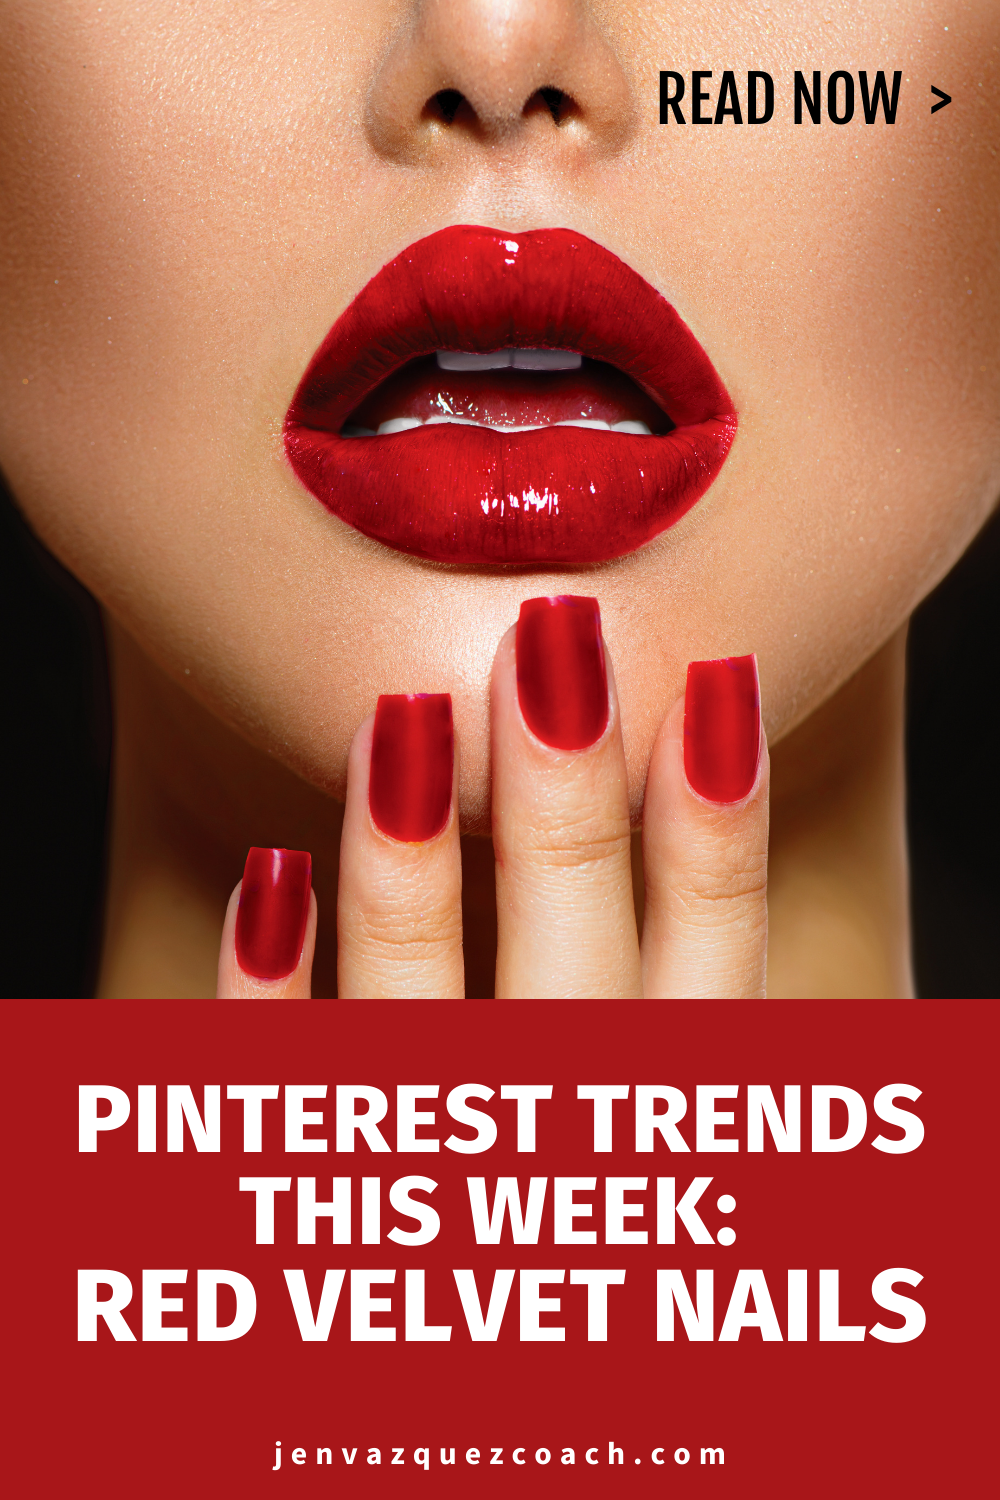 What Are People Searching For On Pinterest This Week THE HOLIDAYS AHEAD Pinterest pins Jen Vazquez Media